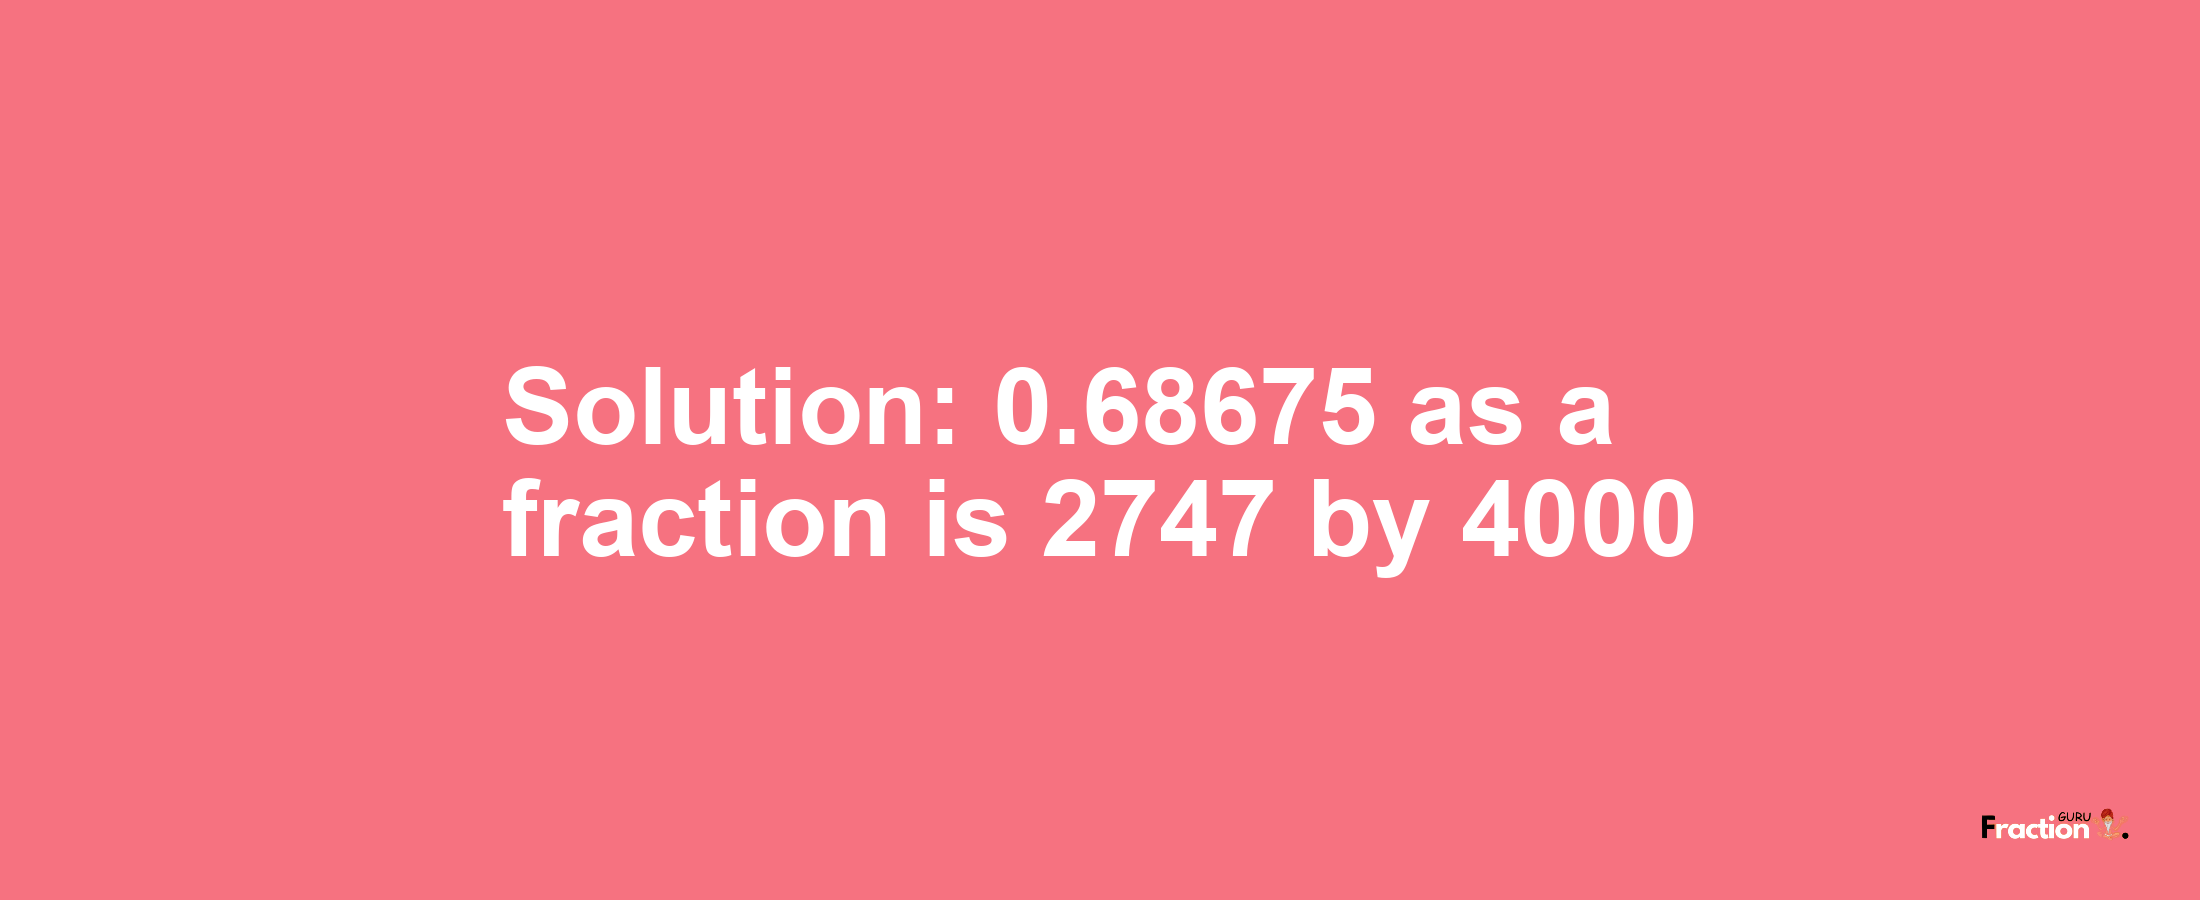 Solution:0.68675 as a fraction is 2747/4000